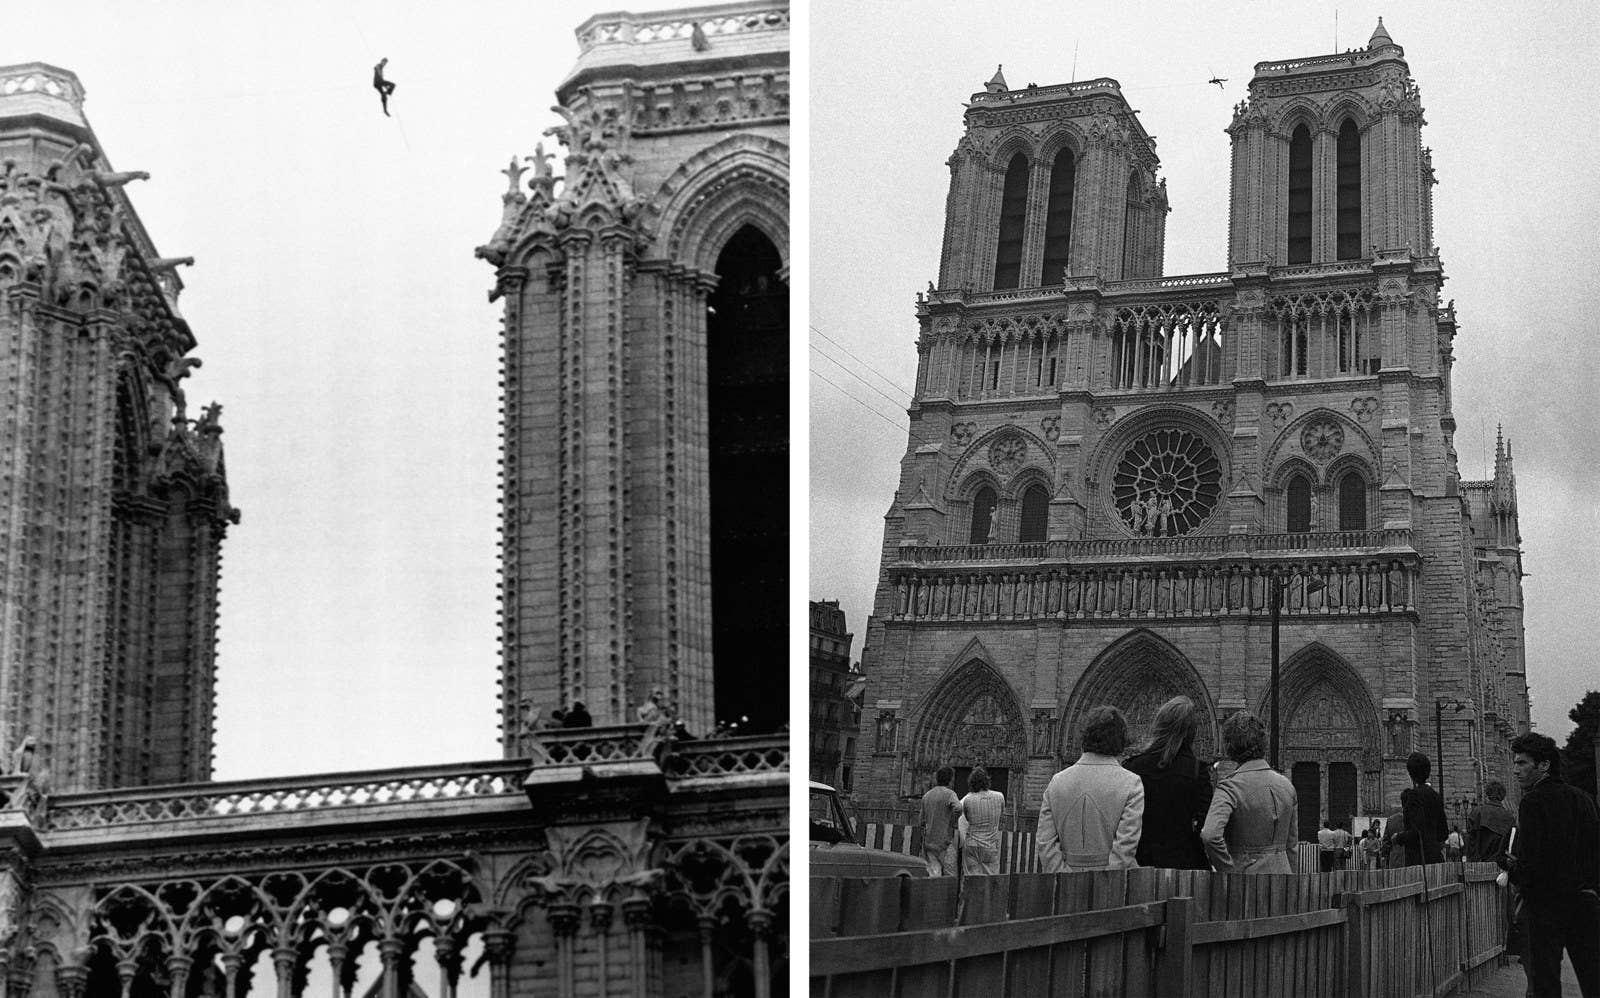 Philippe Petit, a 21-year-old professional tightrope walker, perches 225 feet above the ground, between the two towers of Notre Dame cathedral, Paris, on June 26, 1971, during a stunt which lasted several hours, with police unable to bring him down.